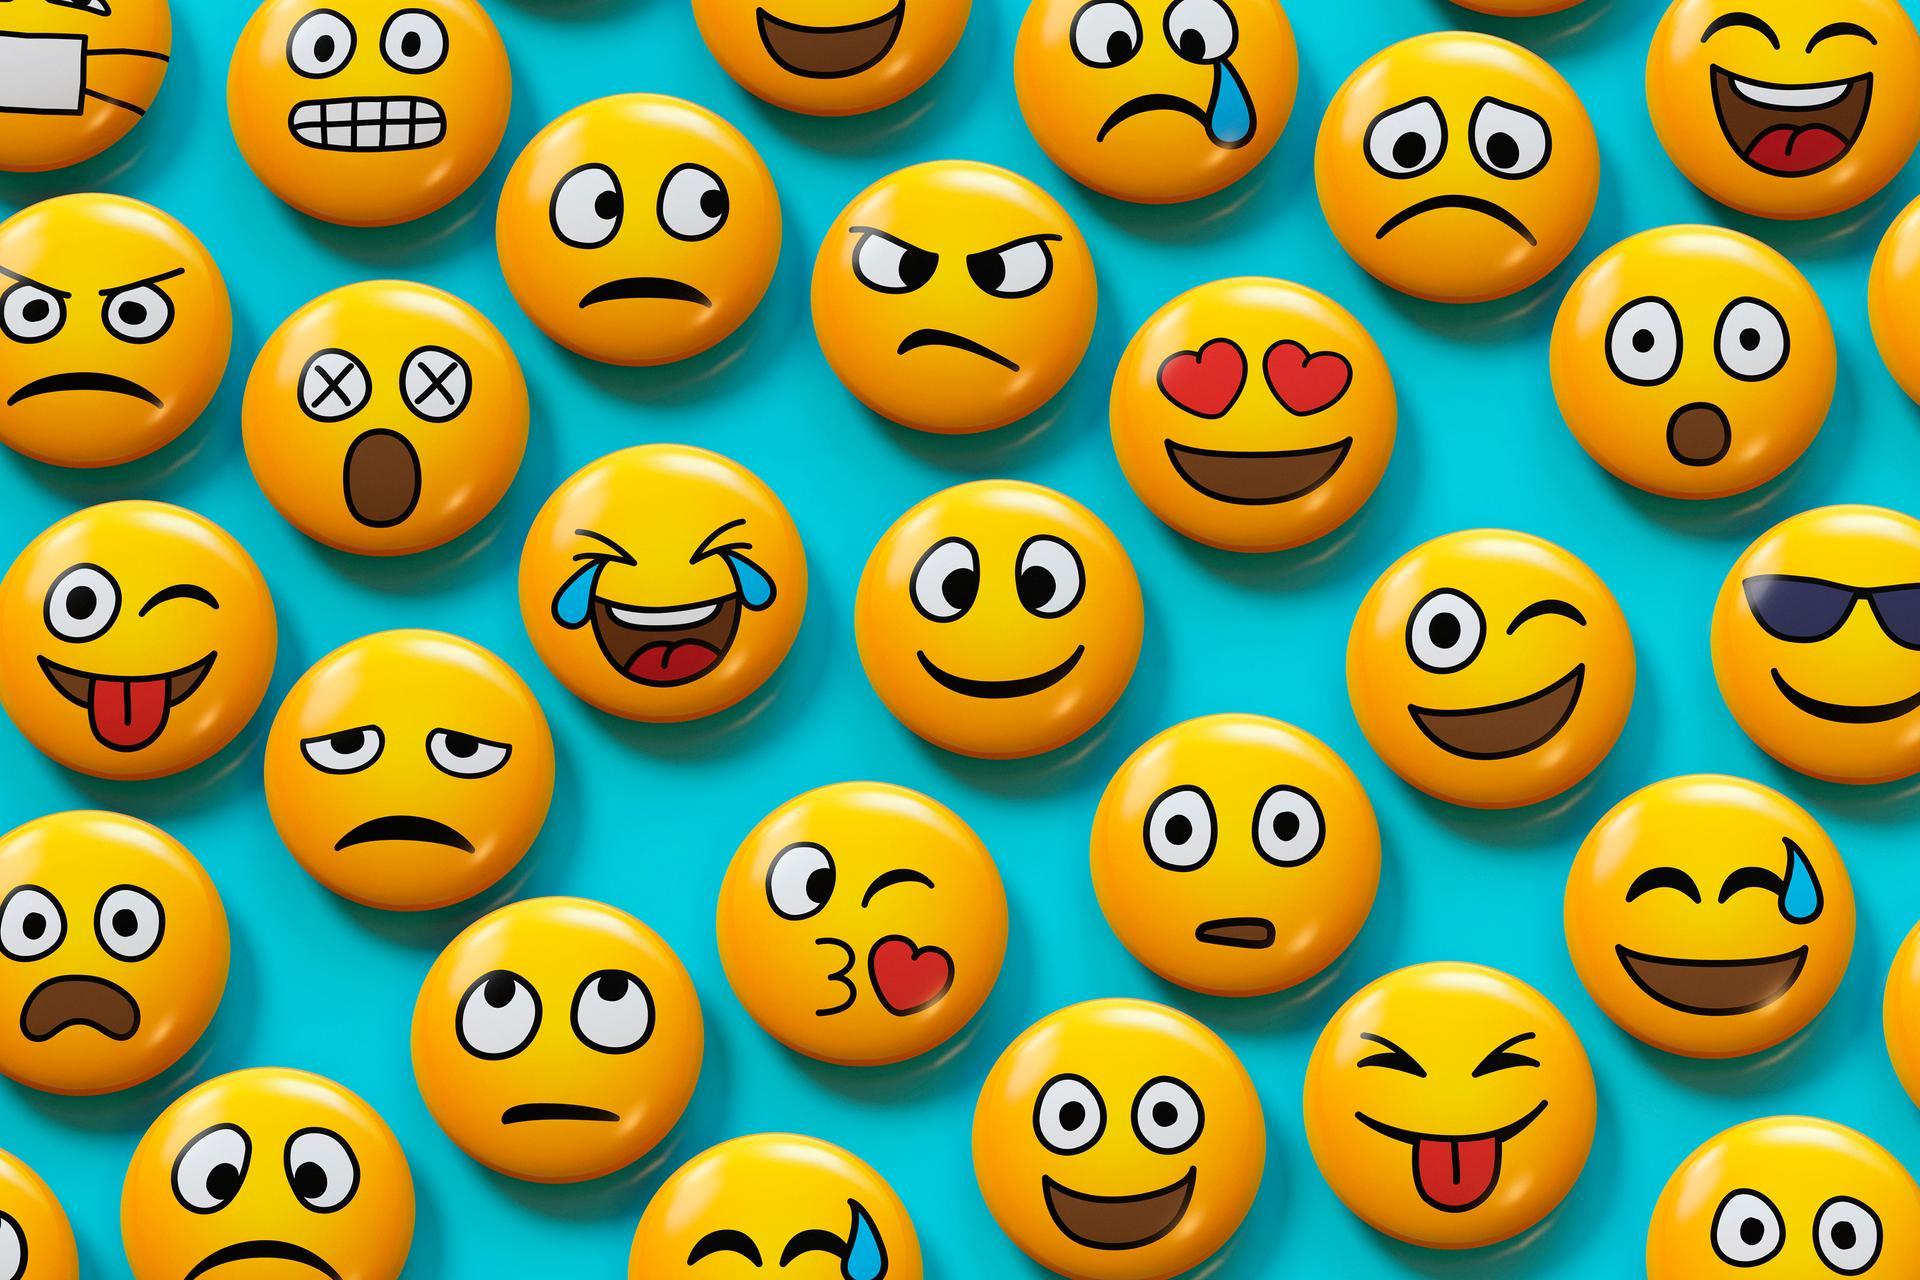 What Do Emojis Mean How Millennials And Gen Z Use Them Very Differently